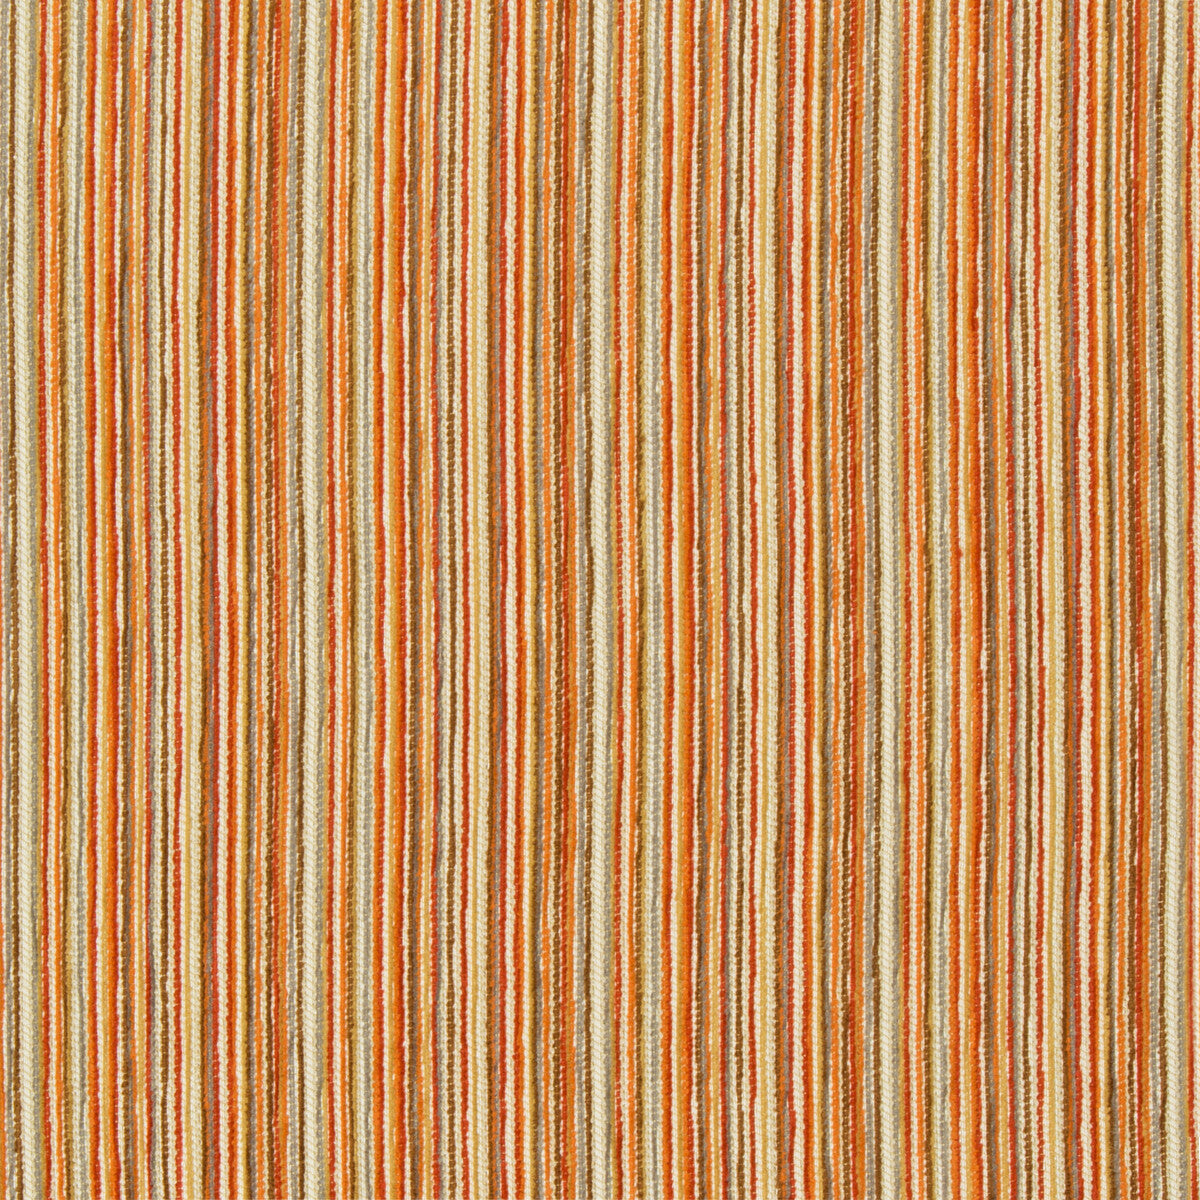 Kravet Design fabric in 34693-1211 color - pattern 34693.1211.0 - by Kravet Design in the Crypton Home collection